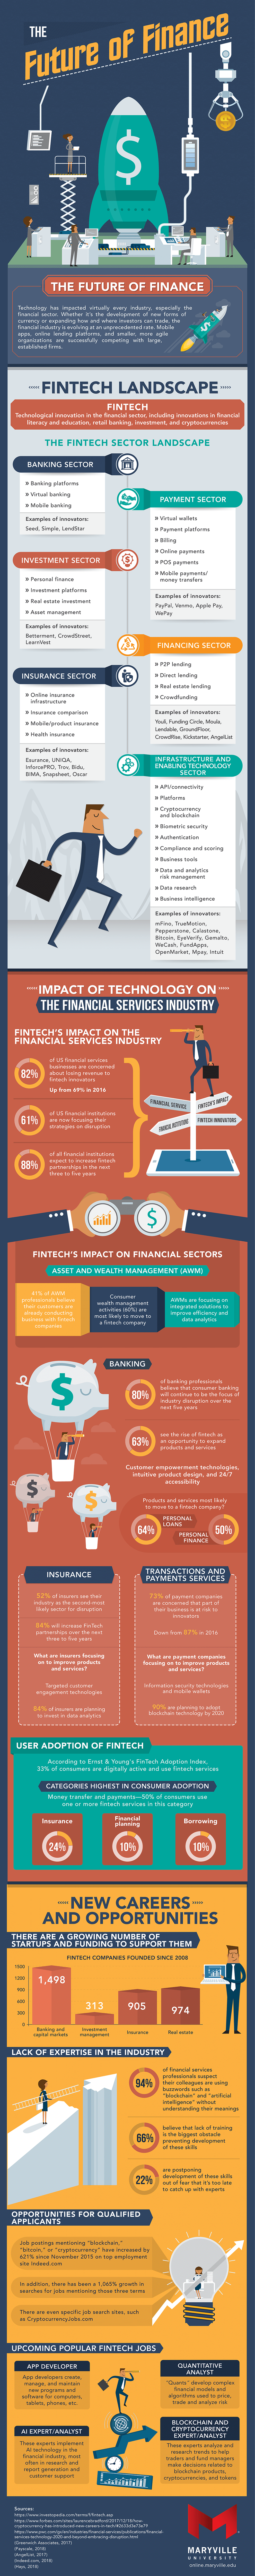 How the emerging concept of fintech is changing the way financial matters are handled